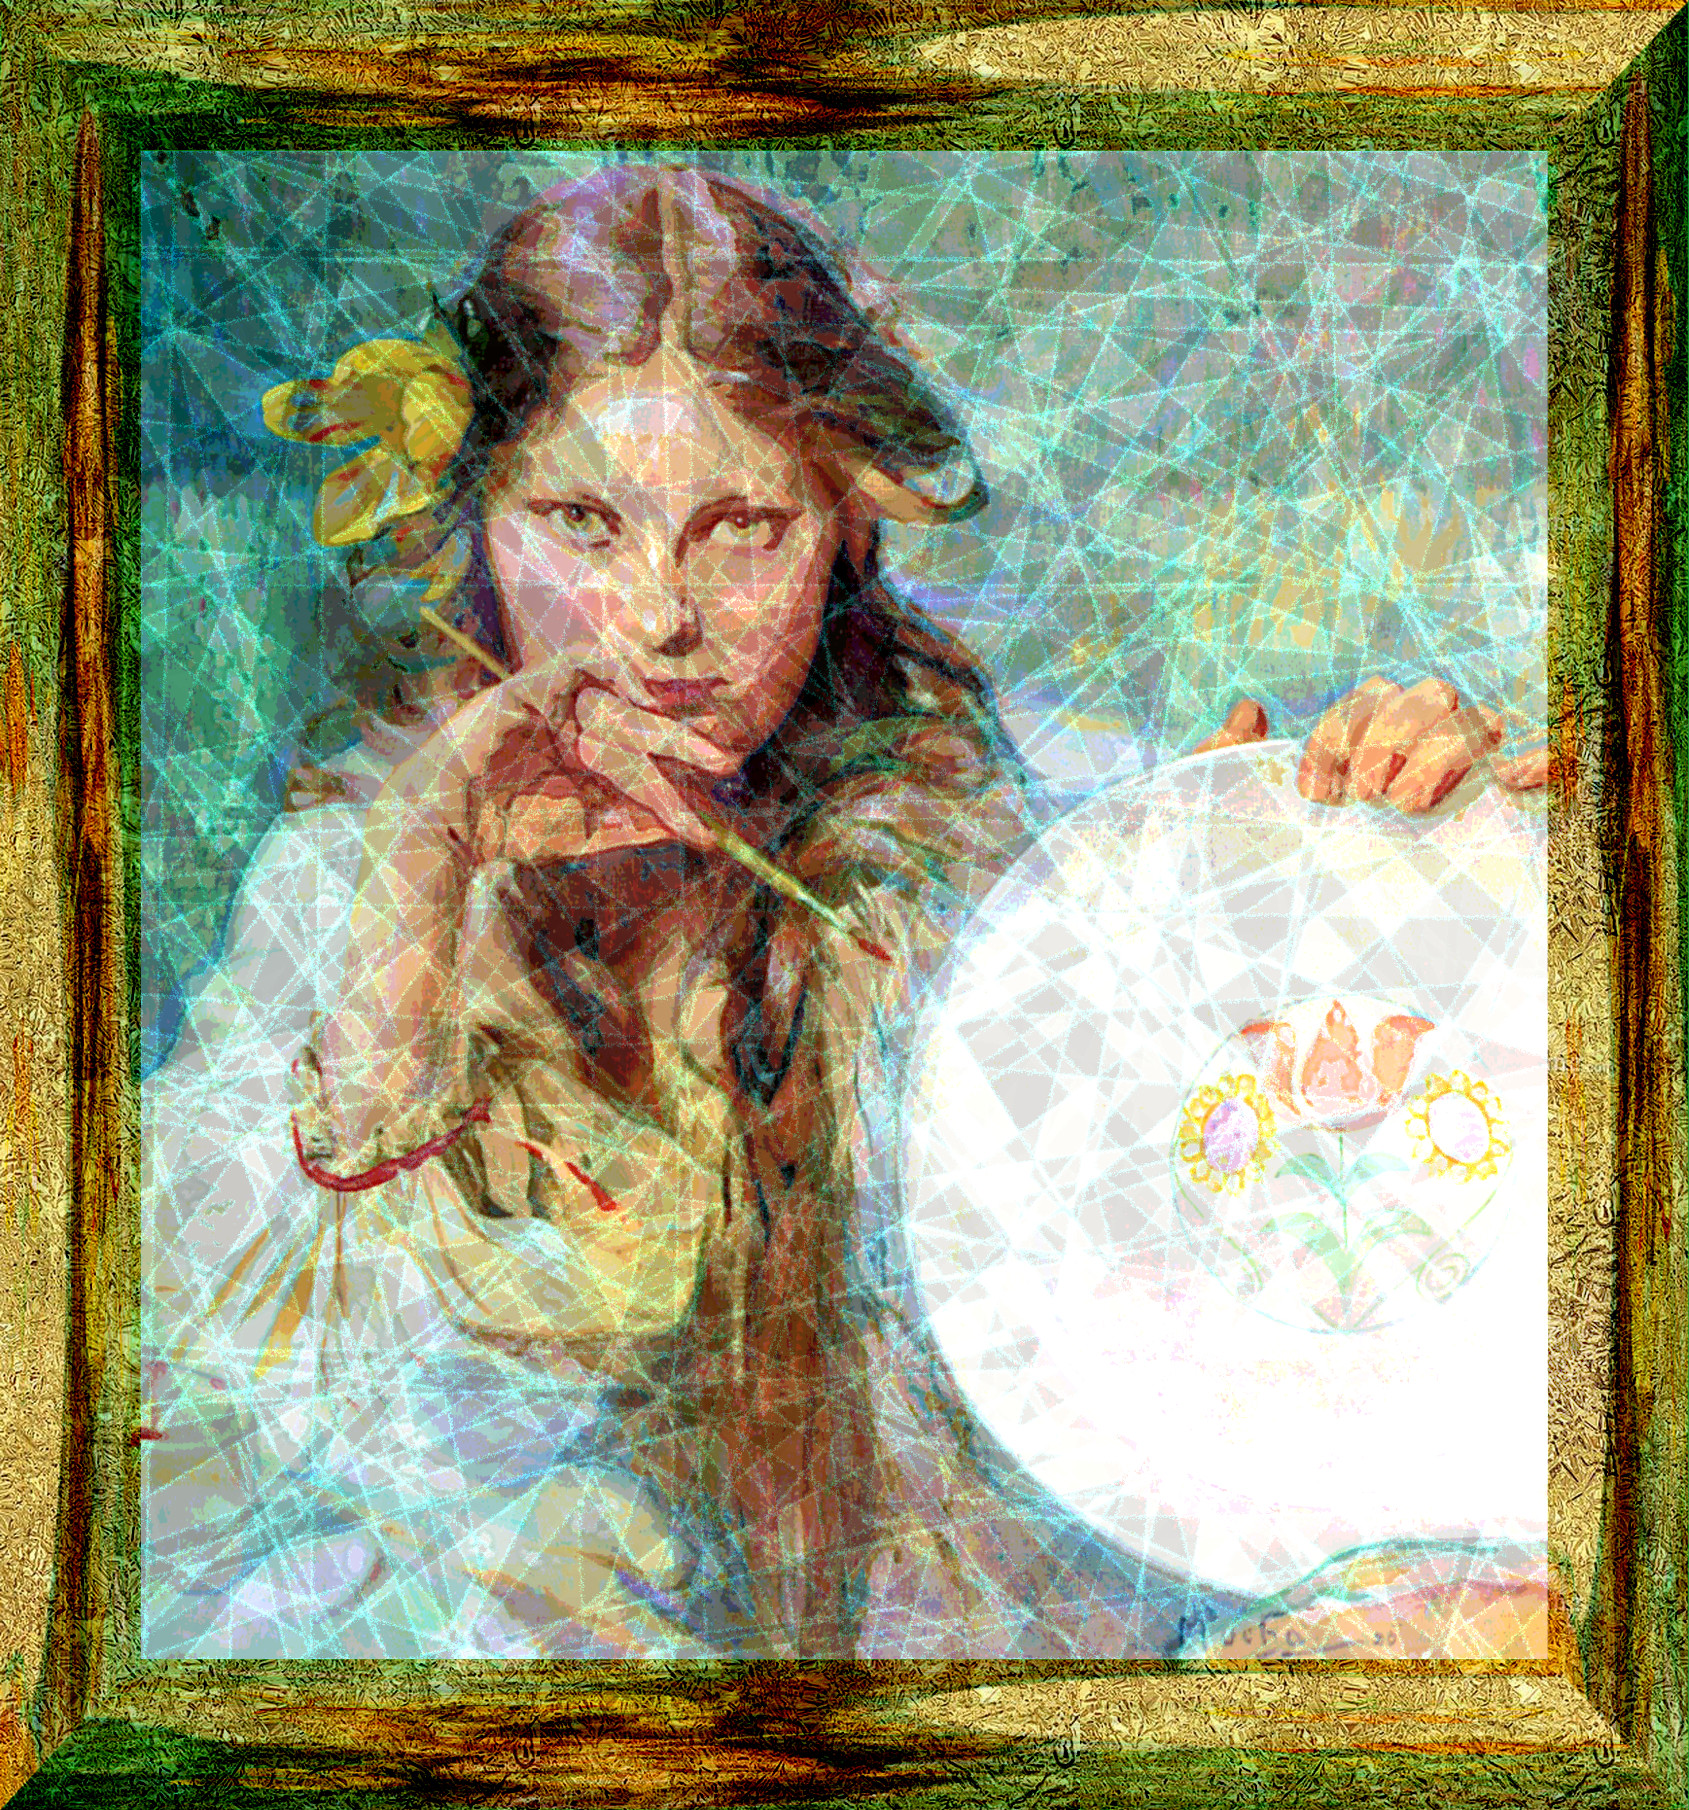 2020-11-04 17-05-59 Mucha_Alphonse_The_Artist_1920_Oil_On_Canvas_On_Board_scaled stroked with crystal background using hue 180 (framed)_GoldenFrame.jpeg